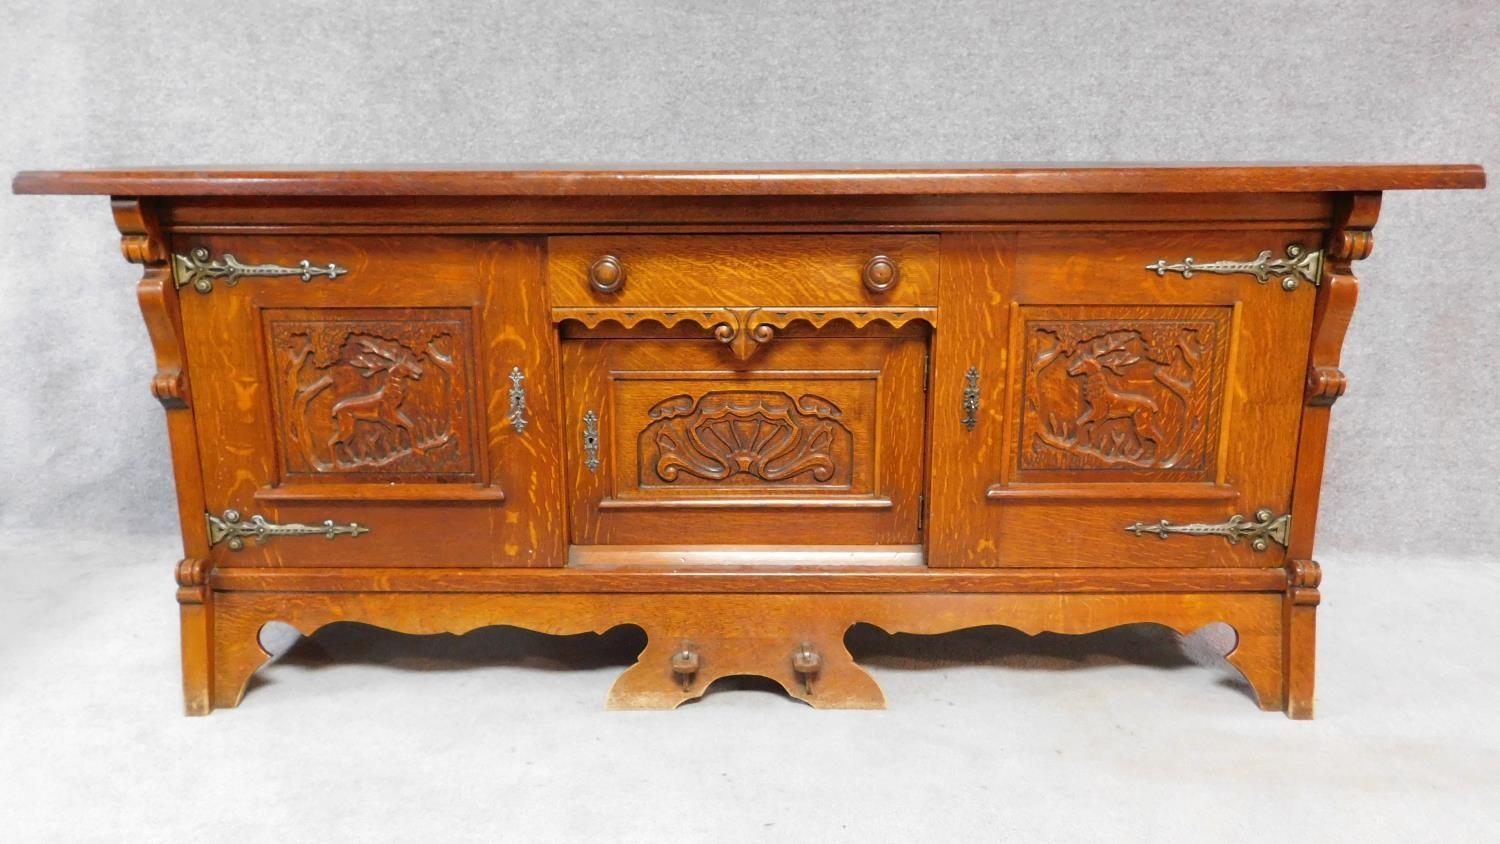 A mid 20th century Continental carved oak sideboard decorated with animal and scroll work